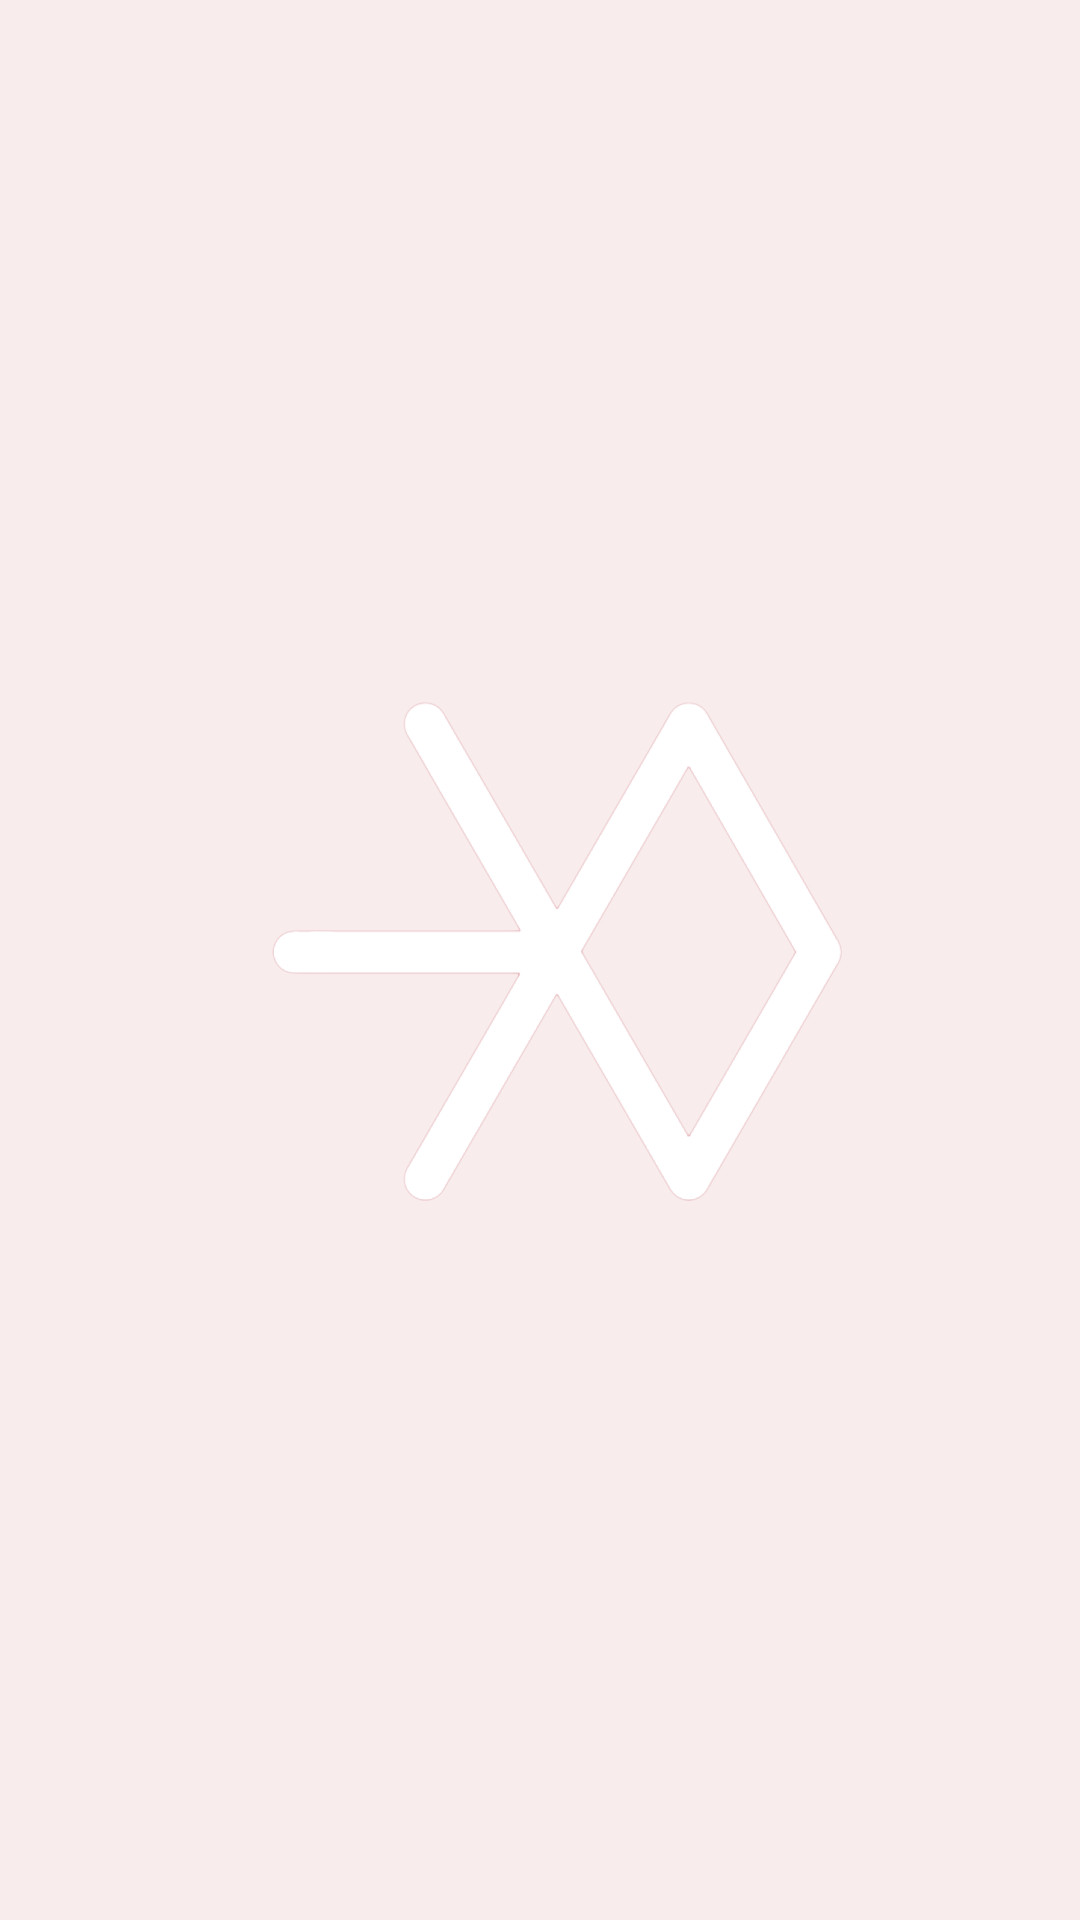 1080x1920 exo logo wallpapers for anon